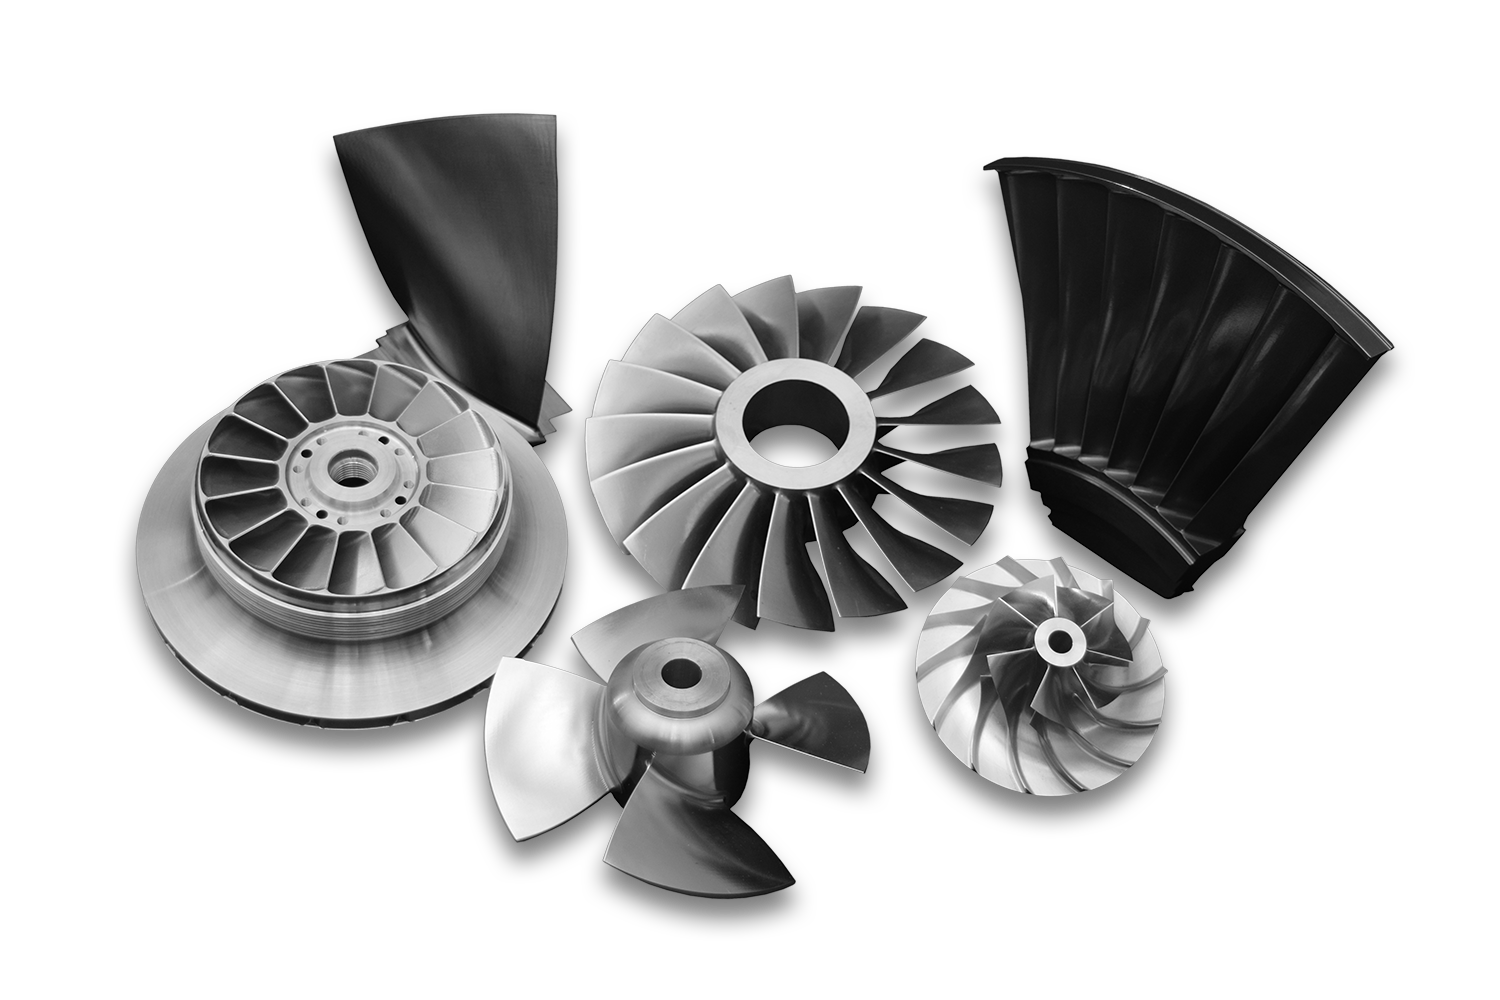 Examples of Parts Designed and Manufactured by Concepts NREC